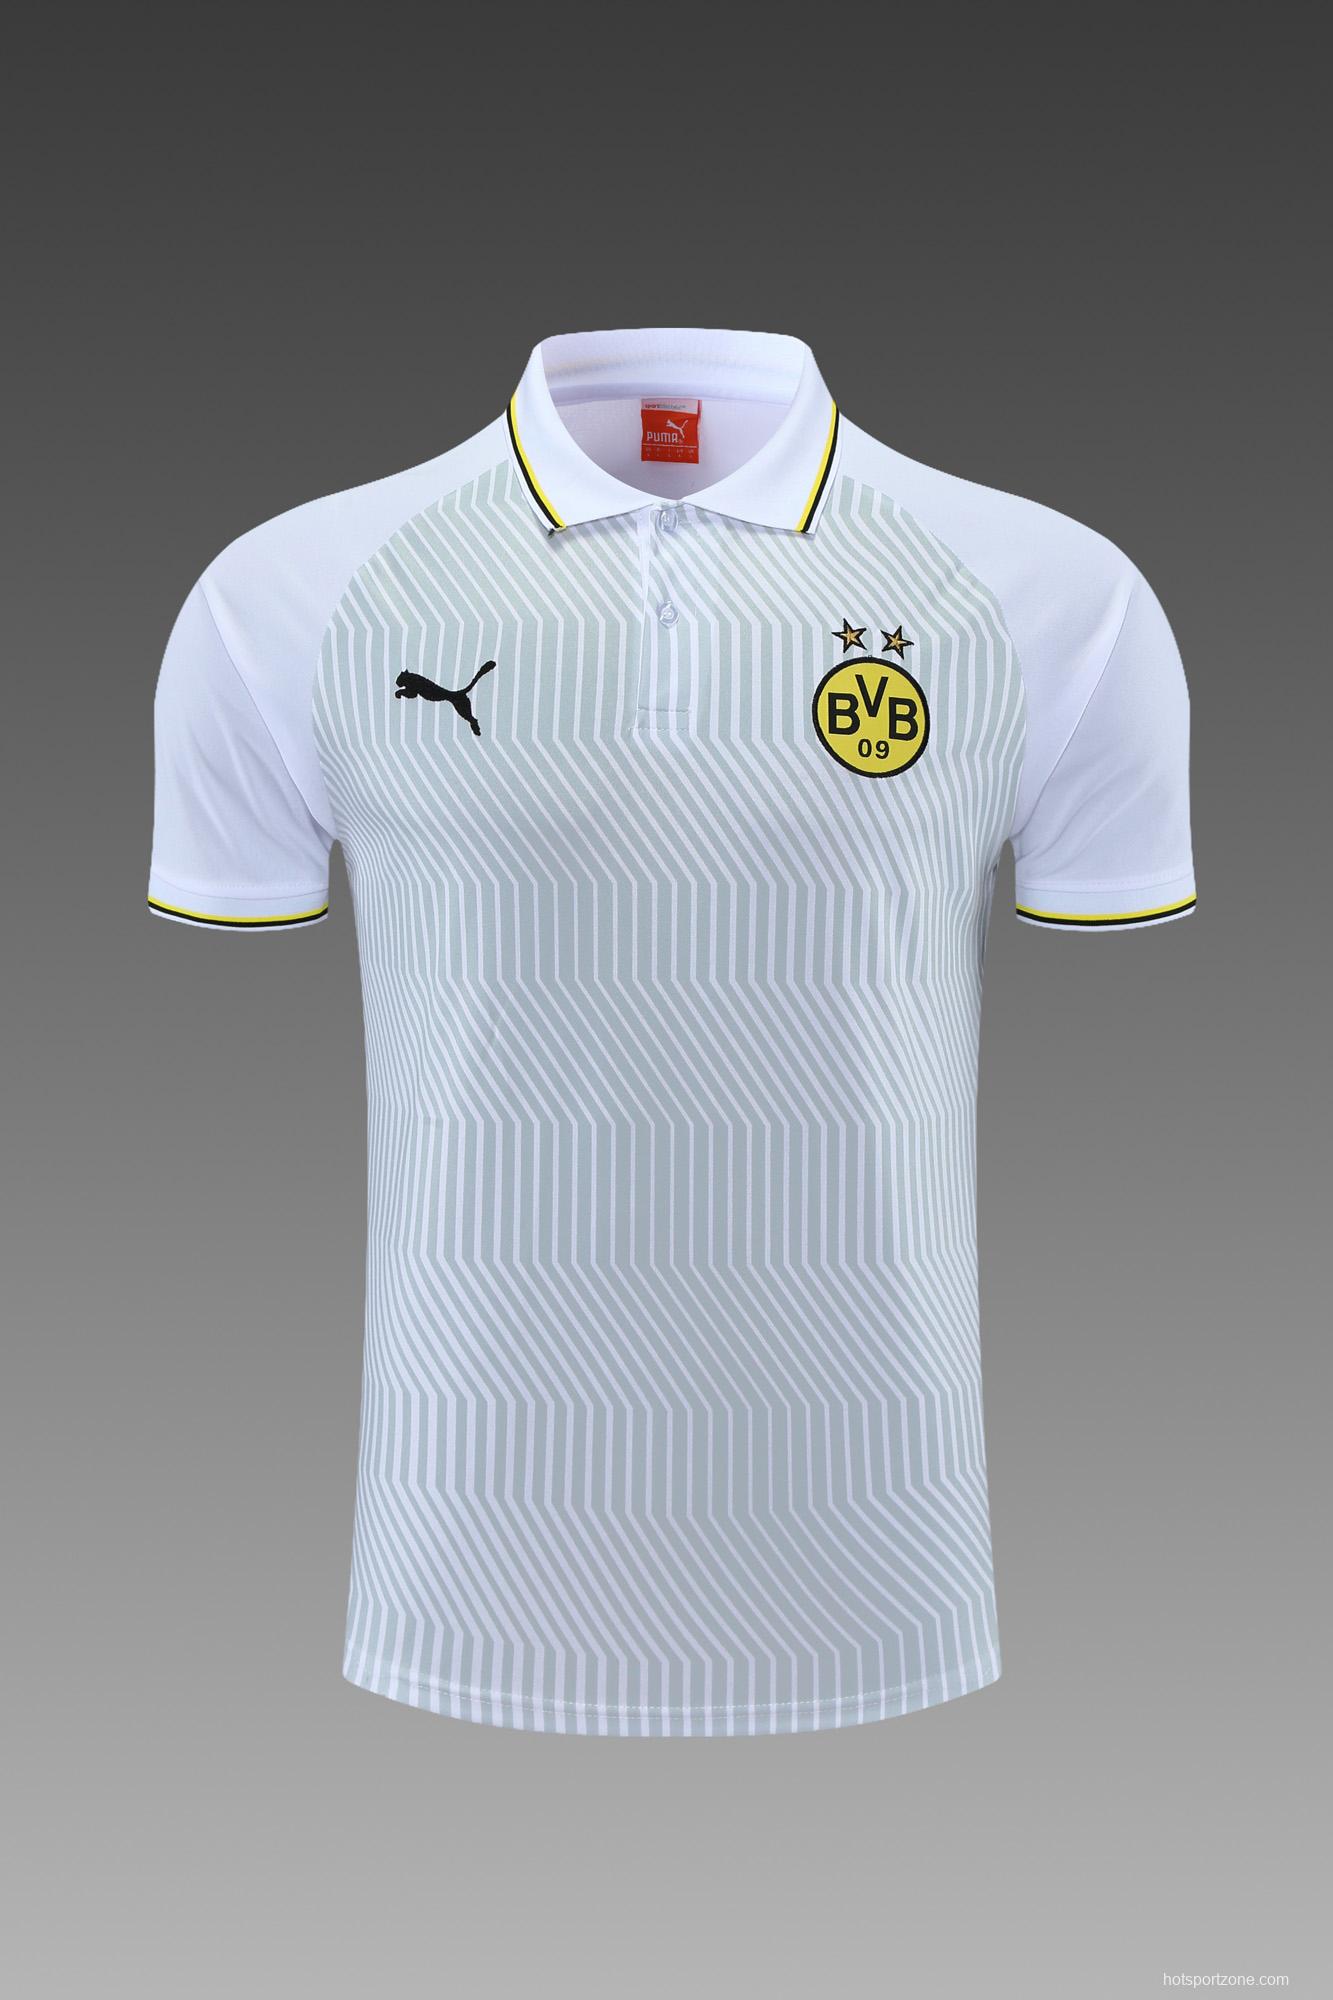 Borussia Dortmund POLO kit White and green pattern (not supported to be sold separately)